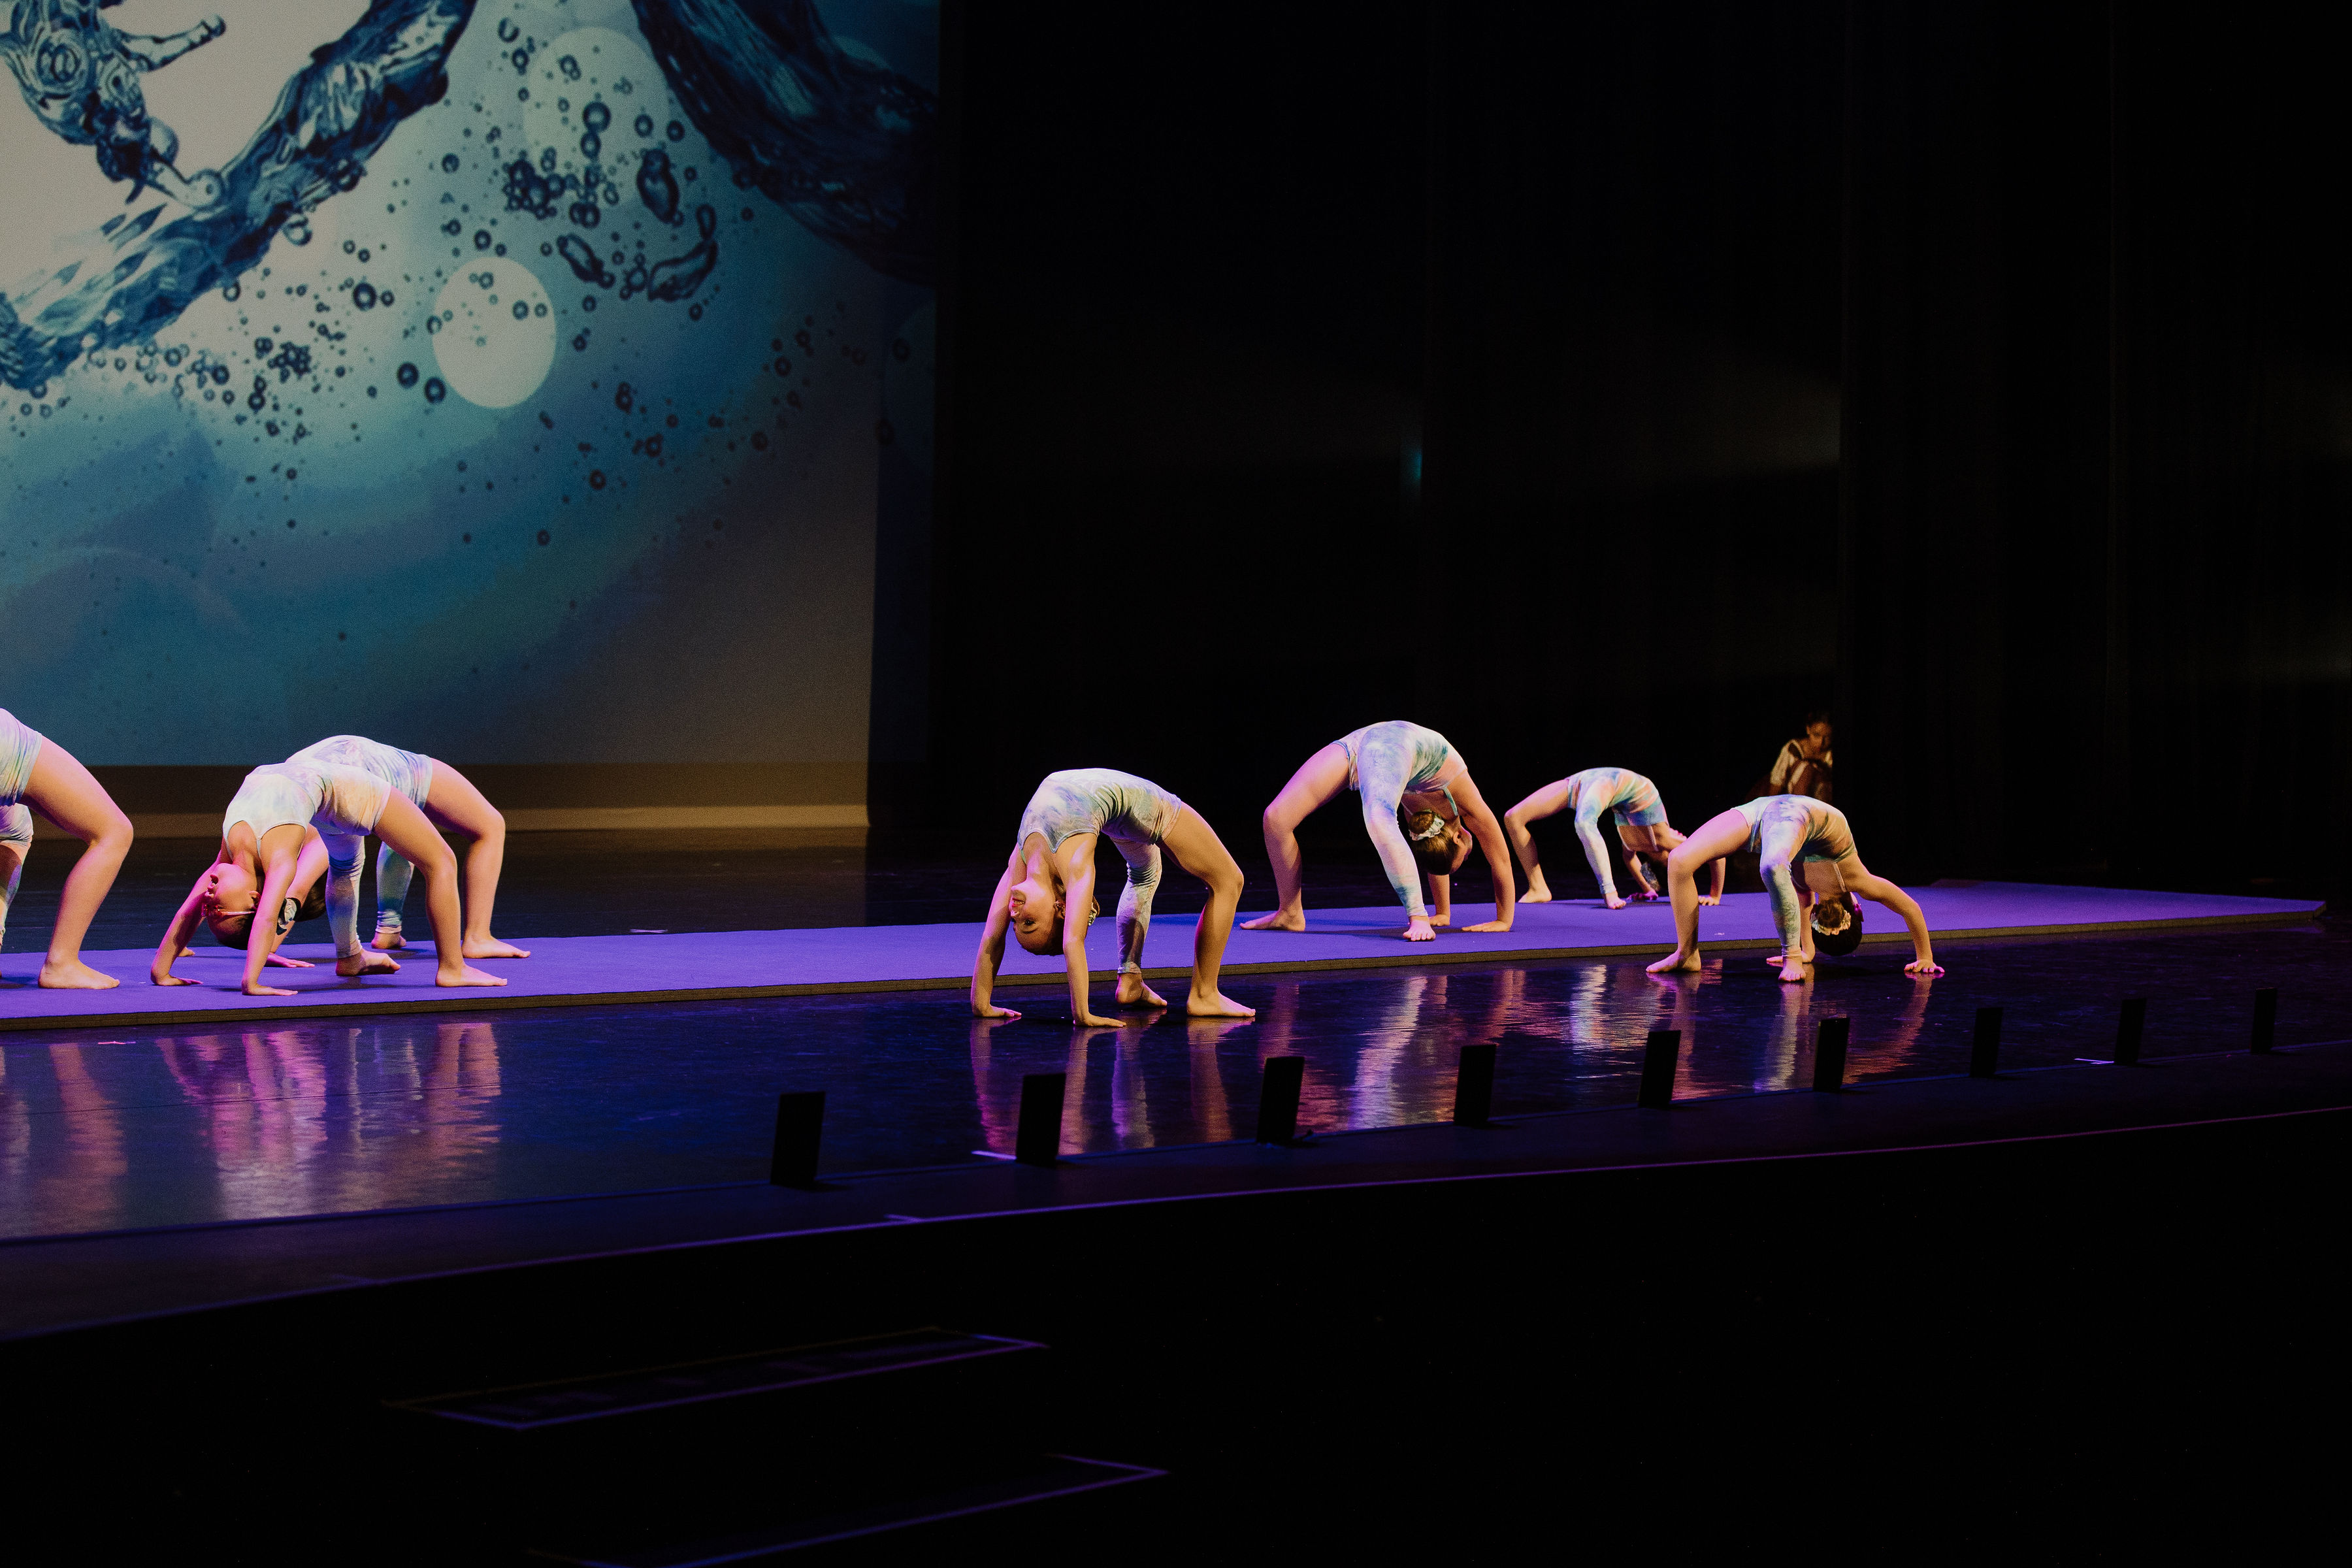 Dancers in bridges during an Acro performance on stage